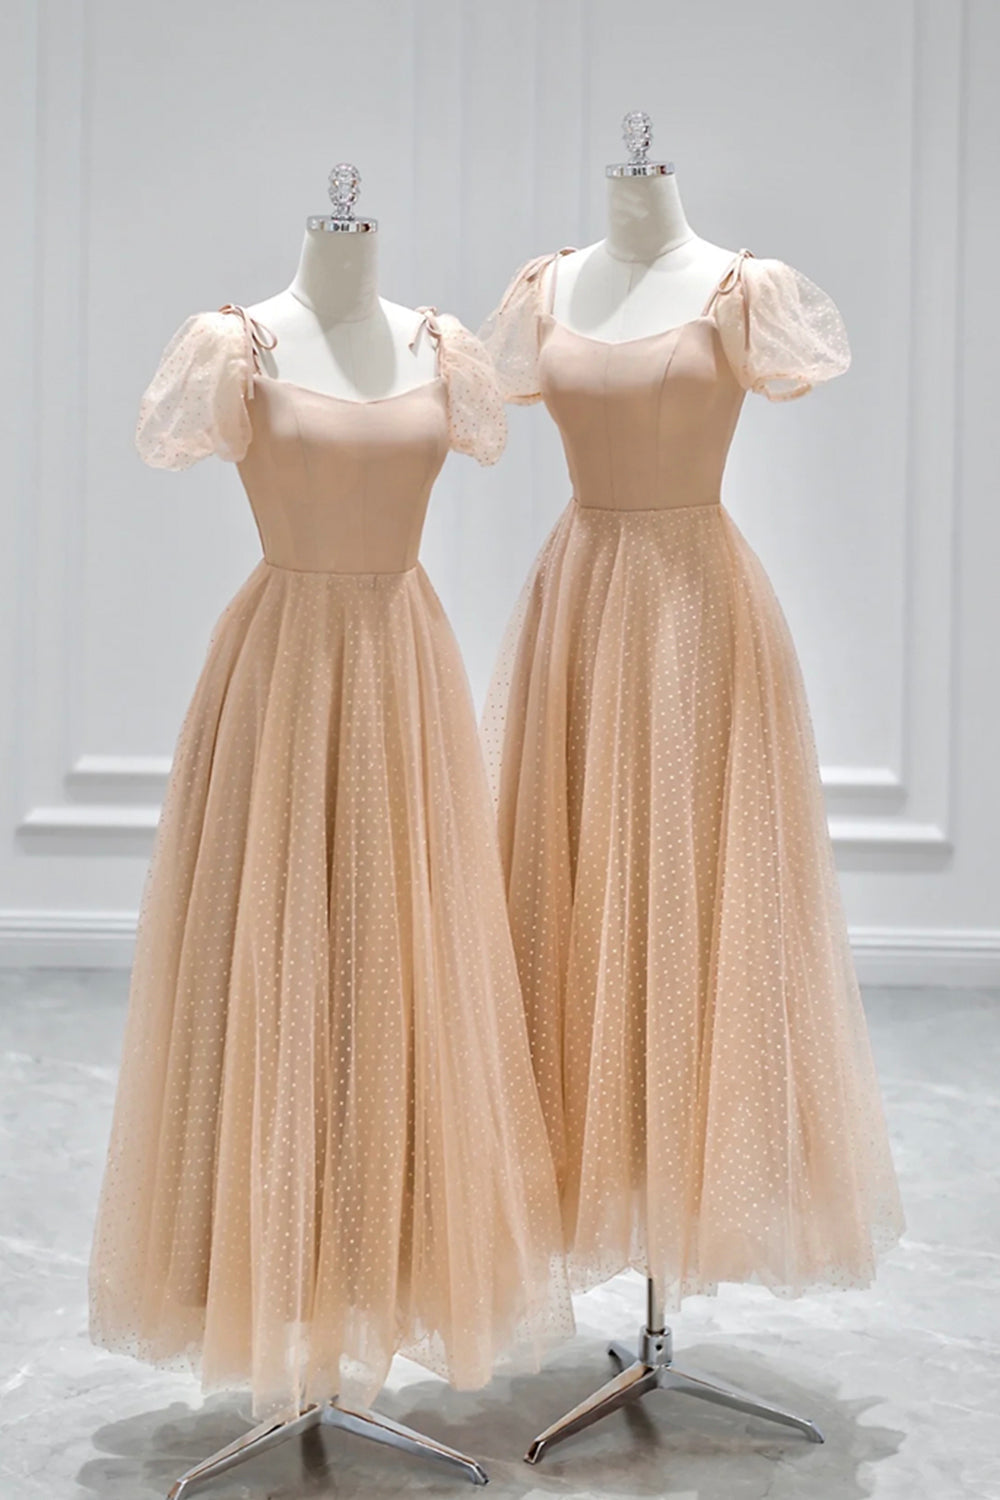 Champagne Tulle Tea Length Prom Dress Outfits For Girls, Cute Short Sleeve Evening Dress